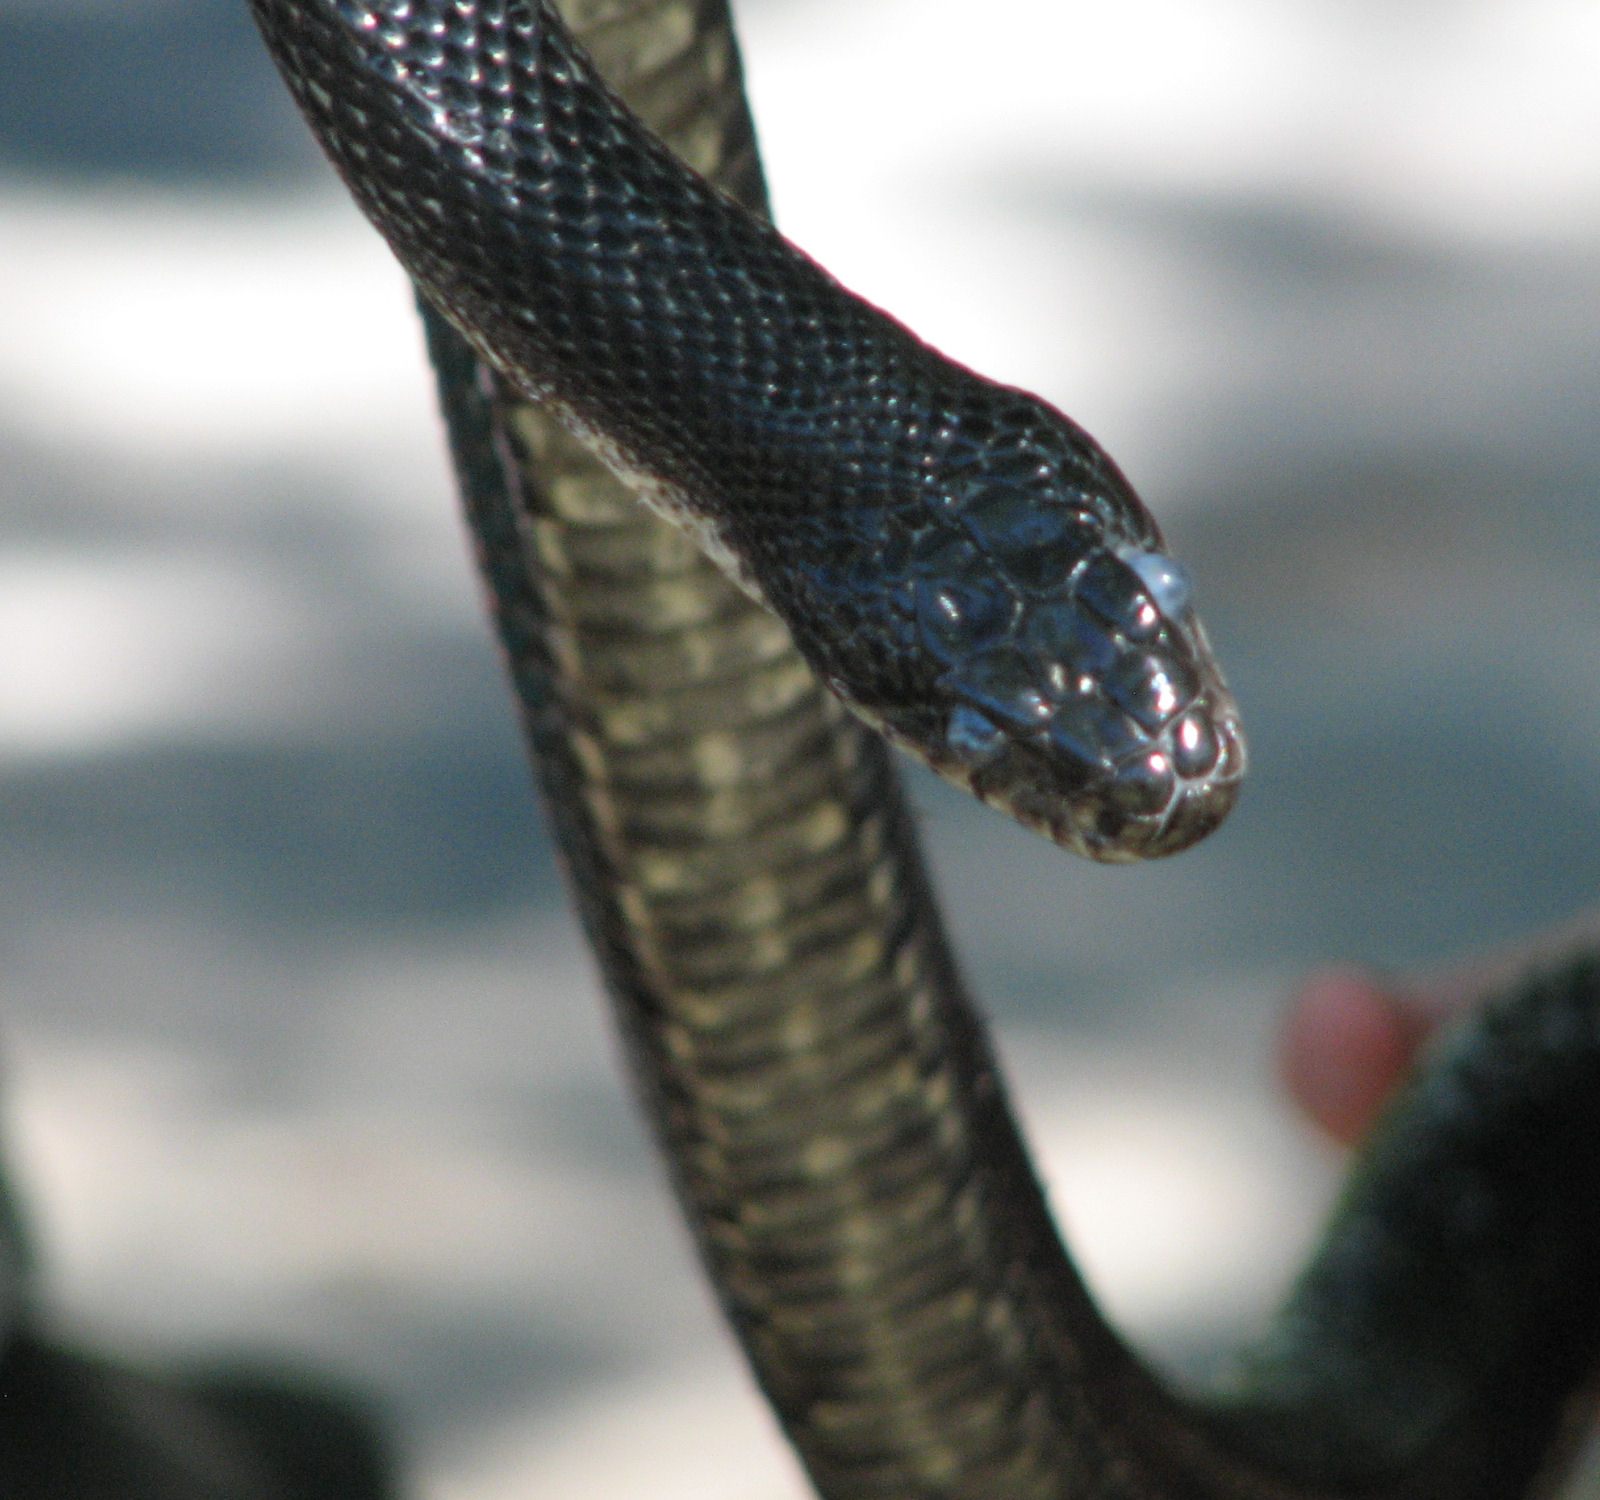 This Week in Google News Alerts: 'Snakes Found' - Atlas Obscura